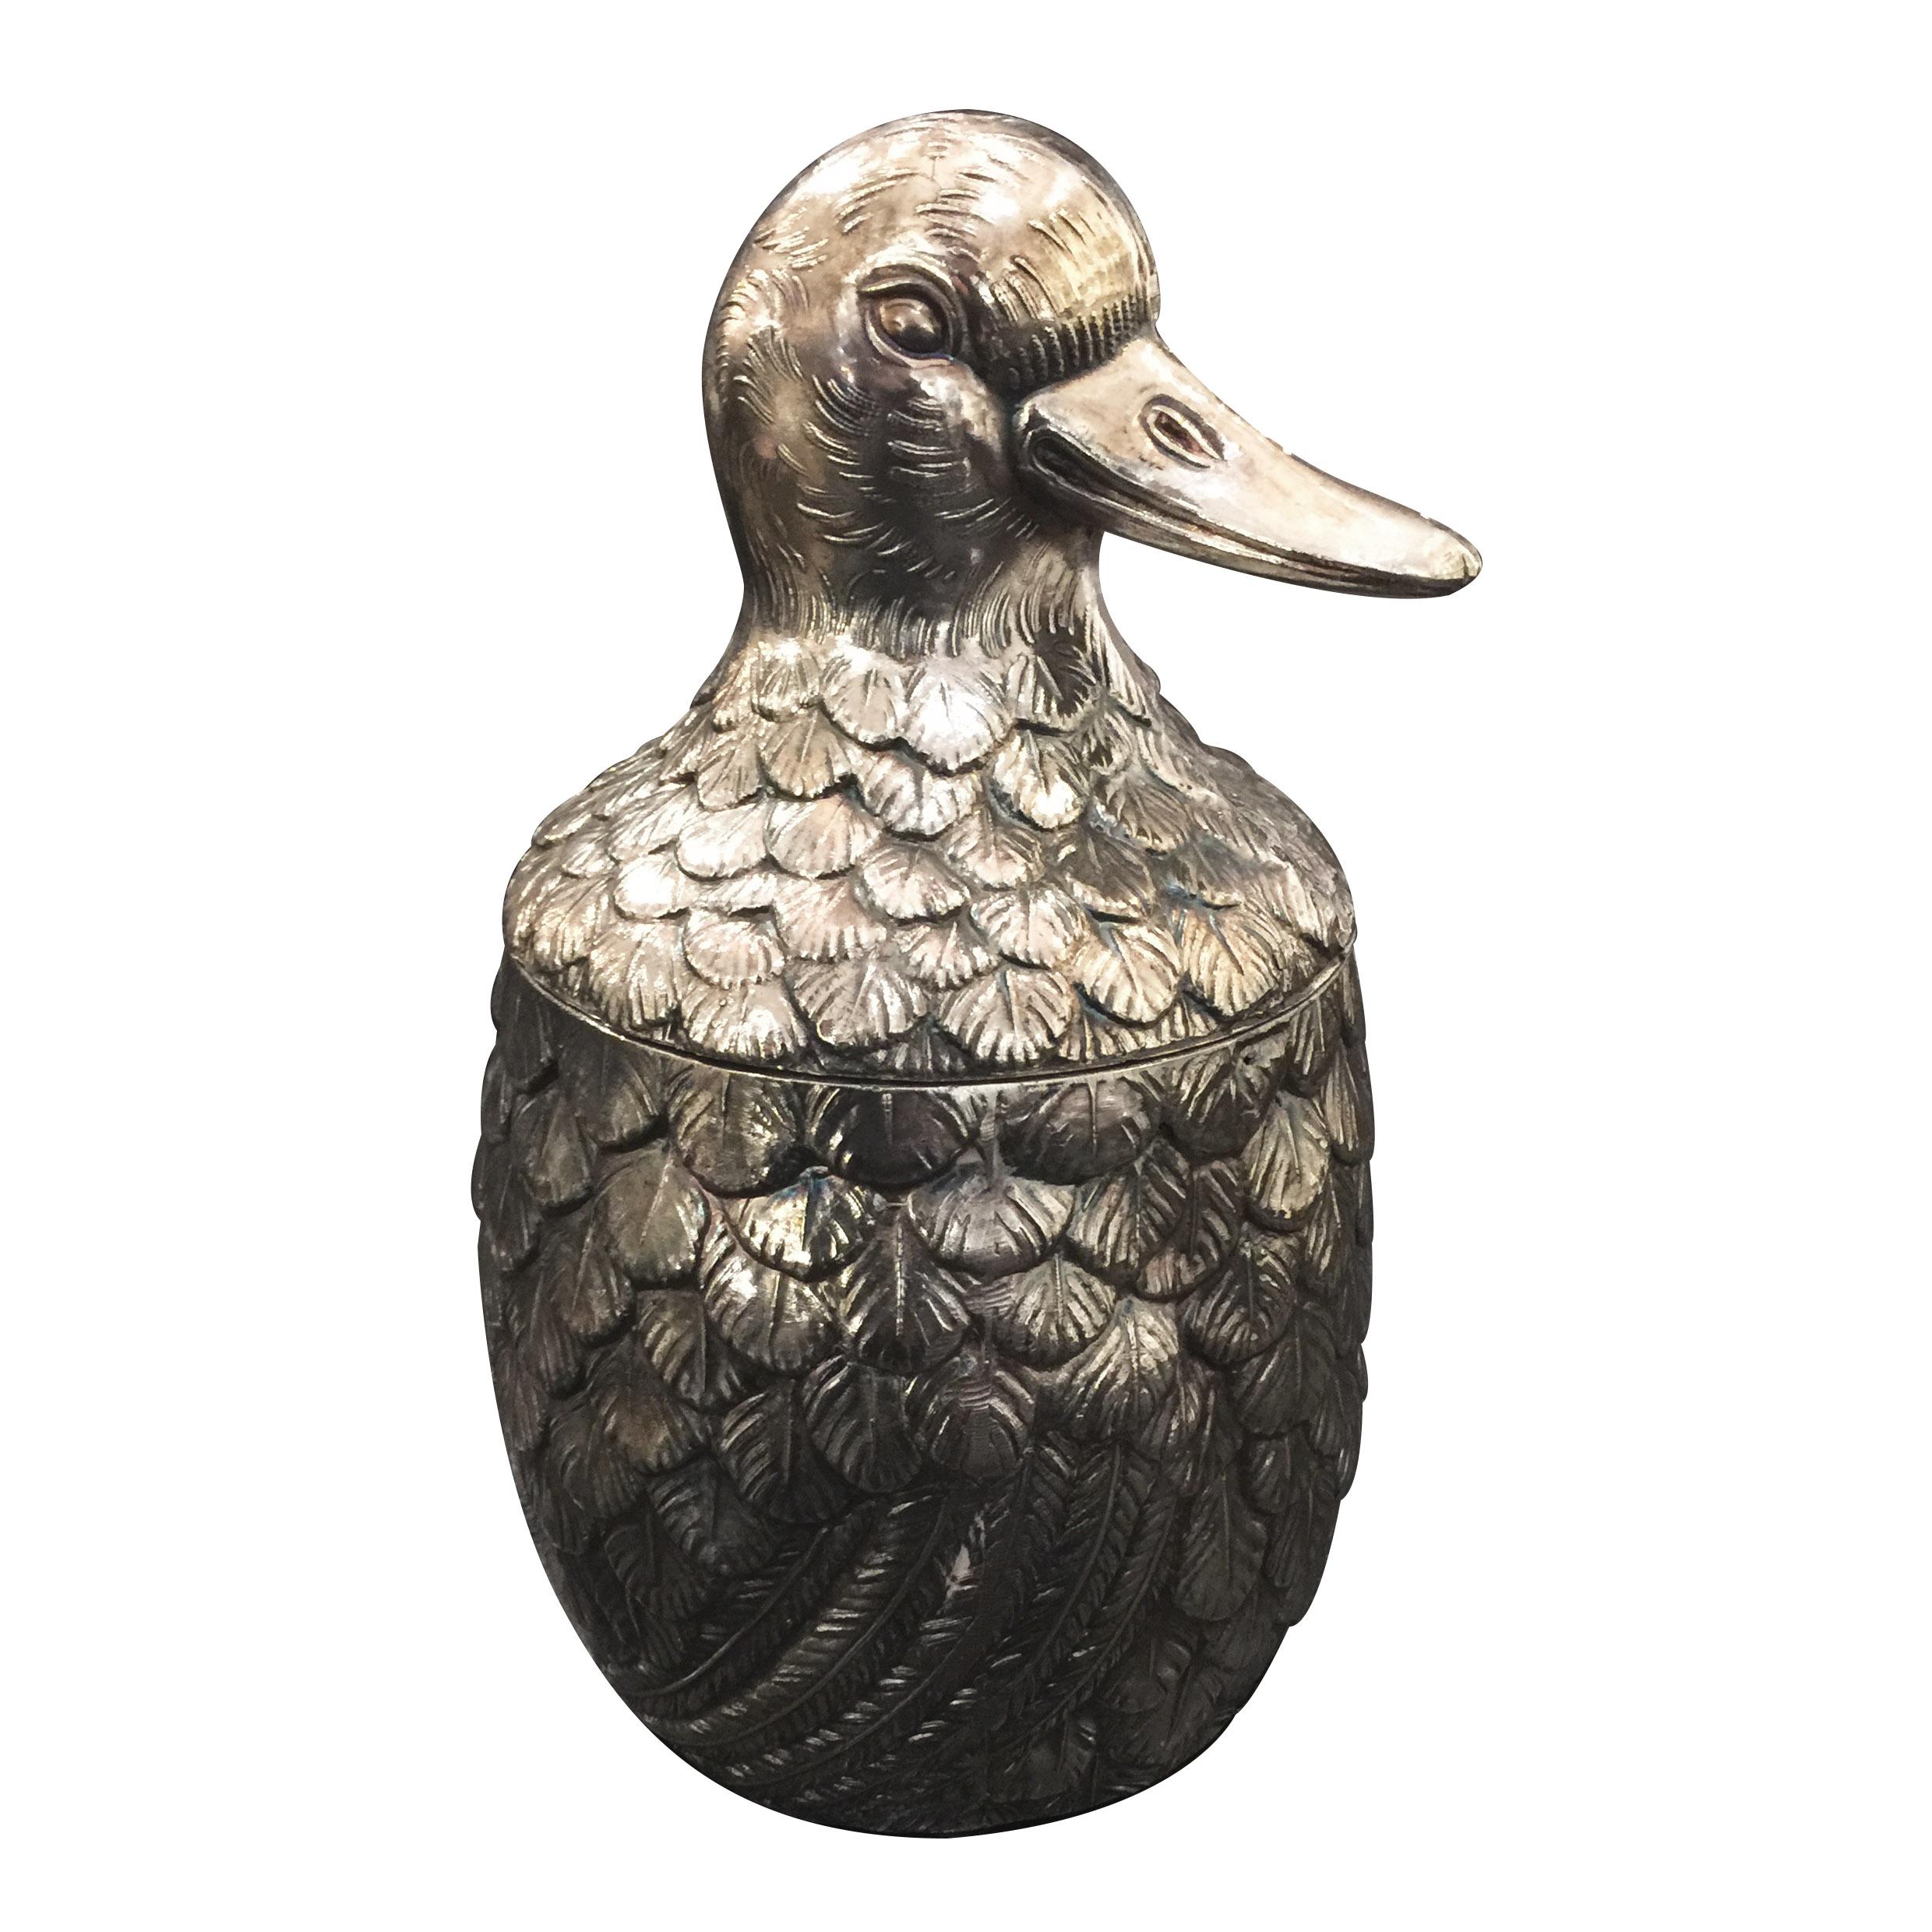 Silver plated Mauro Manetti Duck ice bucket, circa 1970
The inside is made of metal and the outside of silvered cast aluminium
Mark on the base 